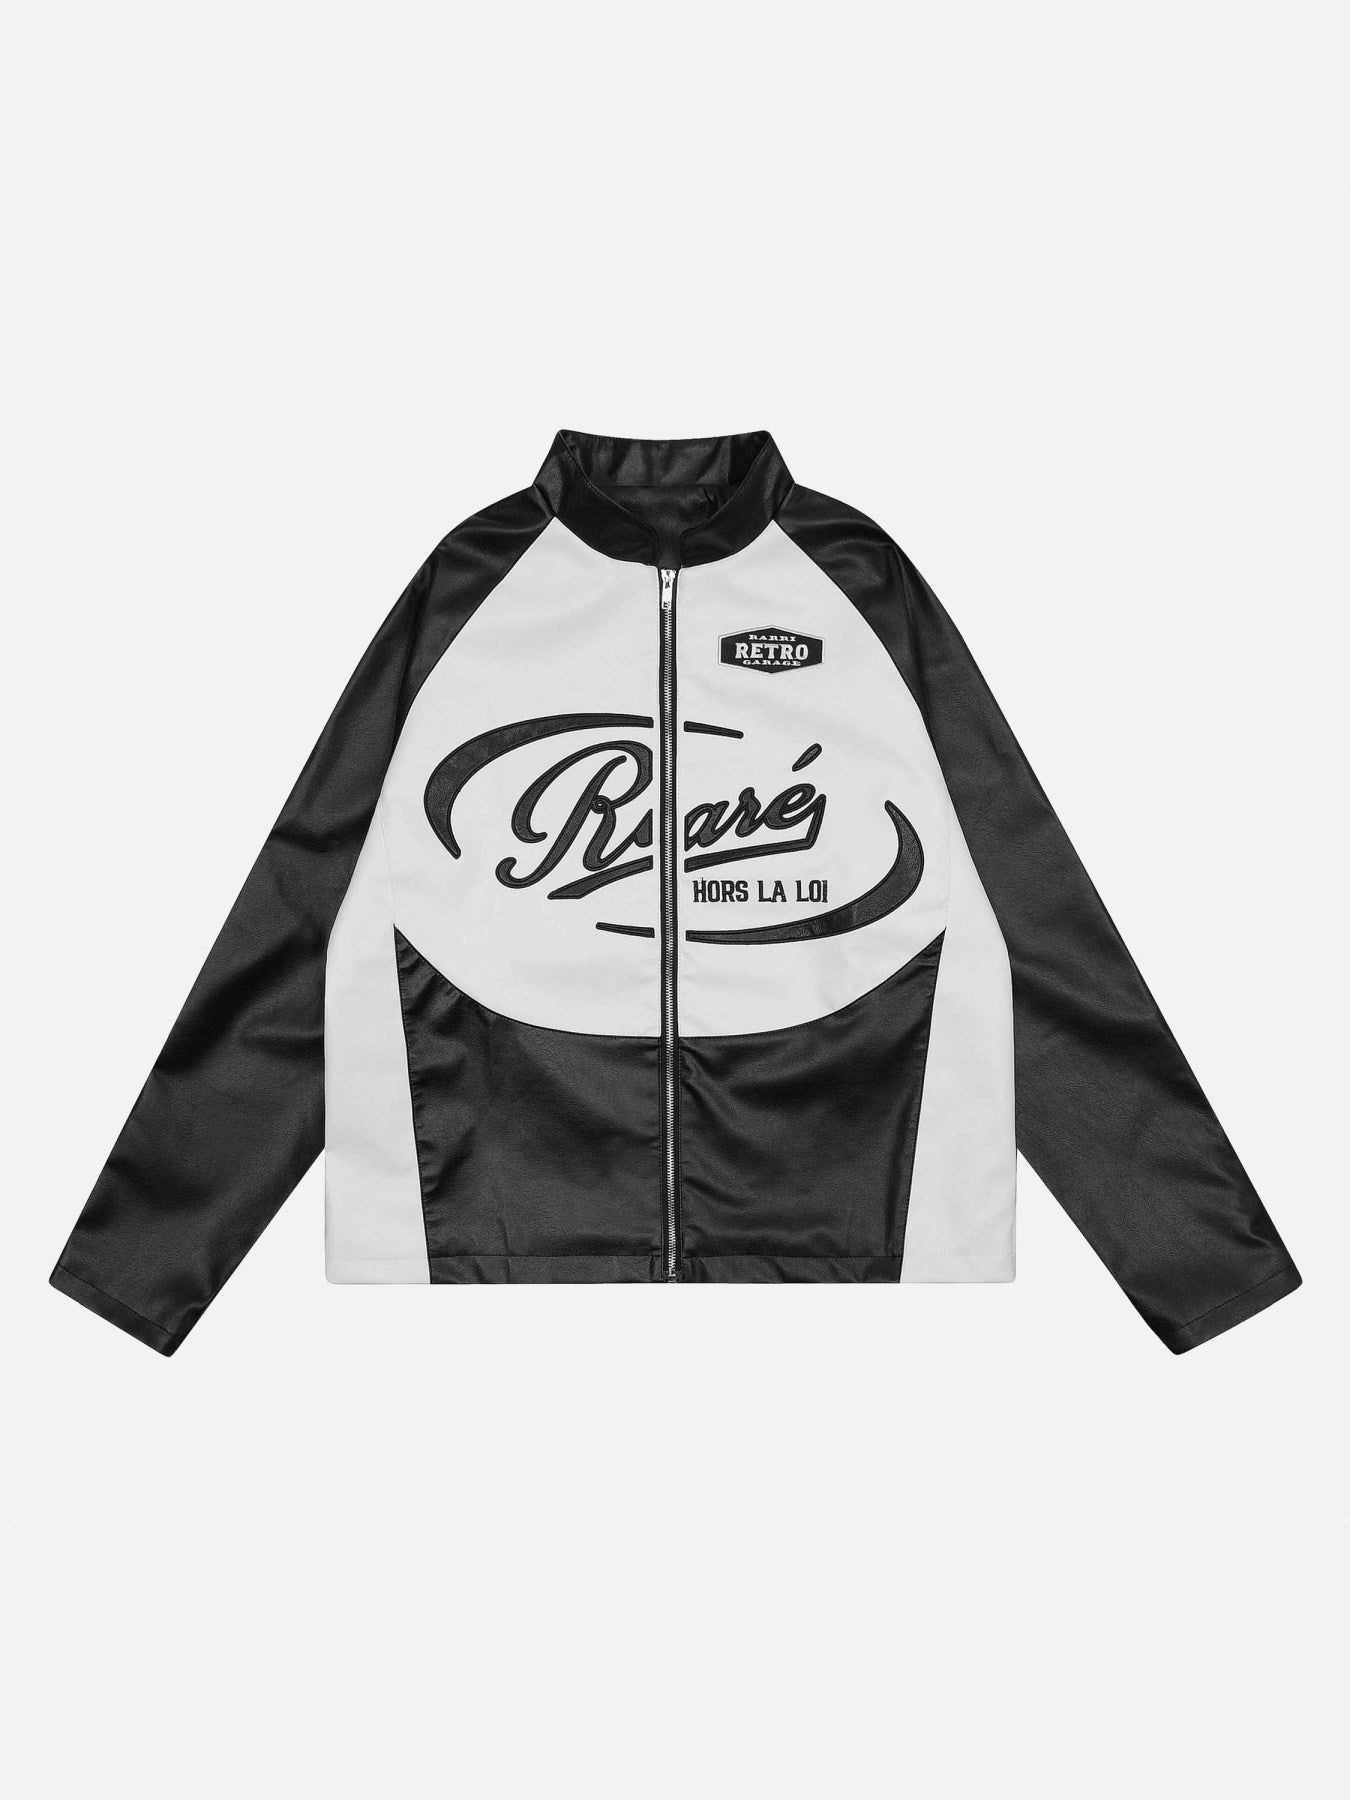 Thesupermade Color Matching Motorcycle Suit PU Leather Jacket